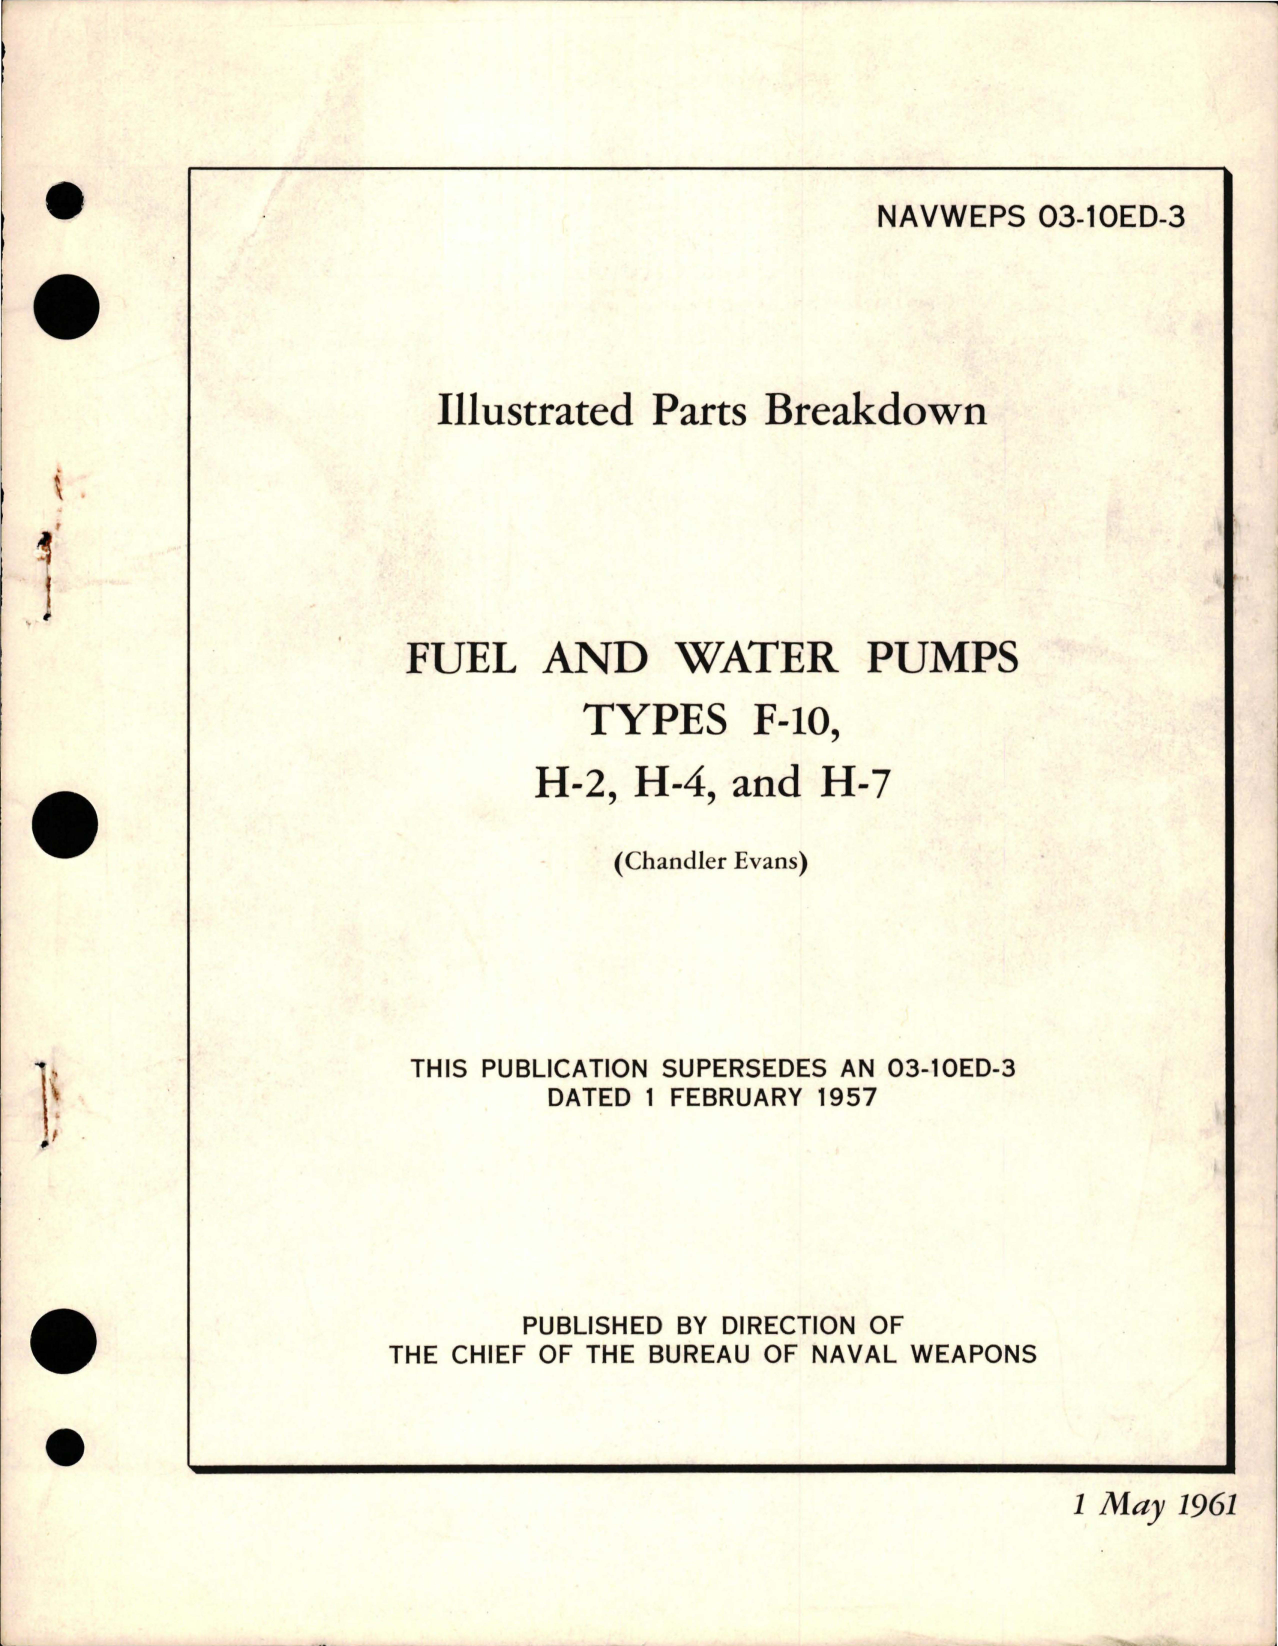 Sample page 1 from AirCorps Library document: Illustrated Parts Breakdown for Fuel and Water Pumps - Types F-10, H-2, H-4 and H-7